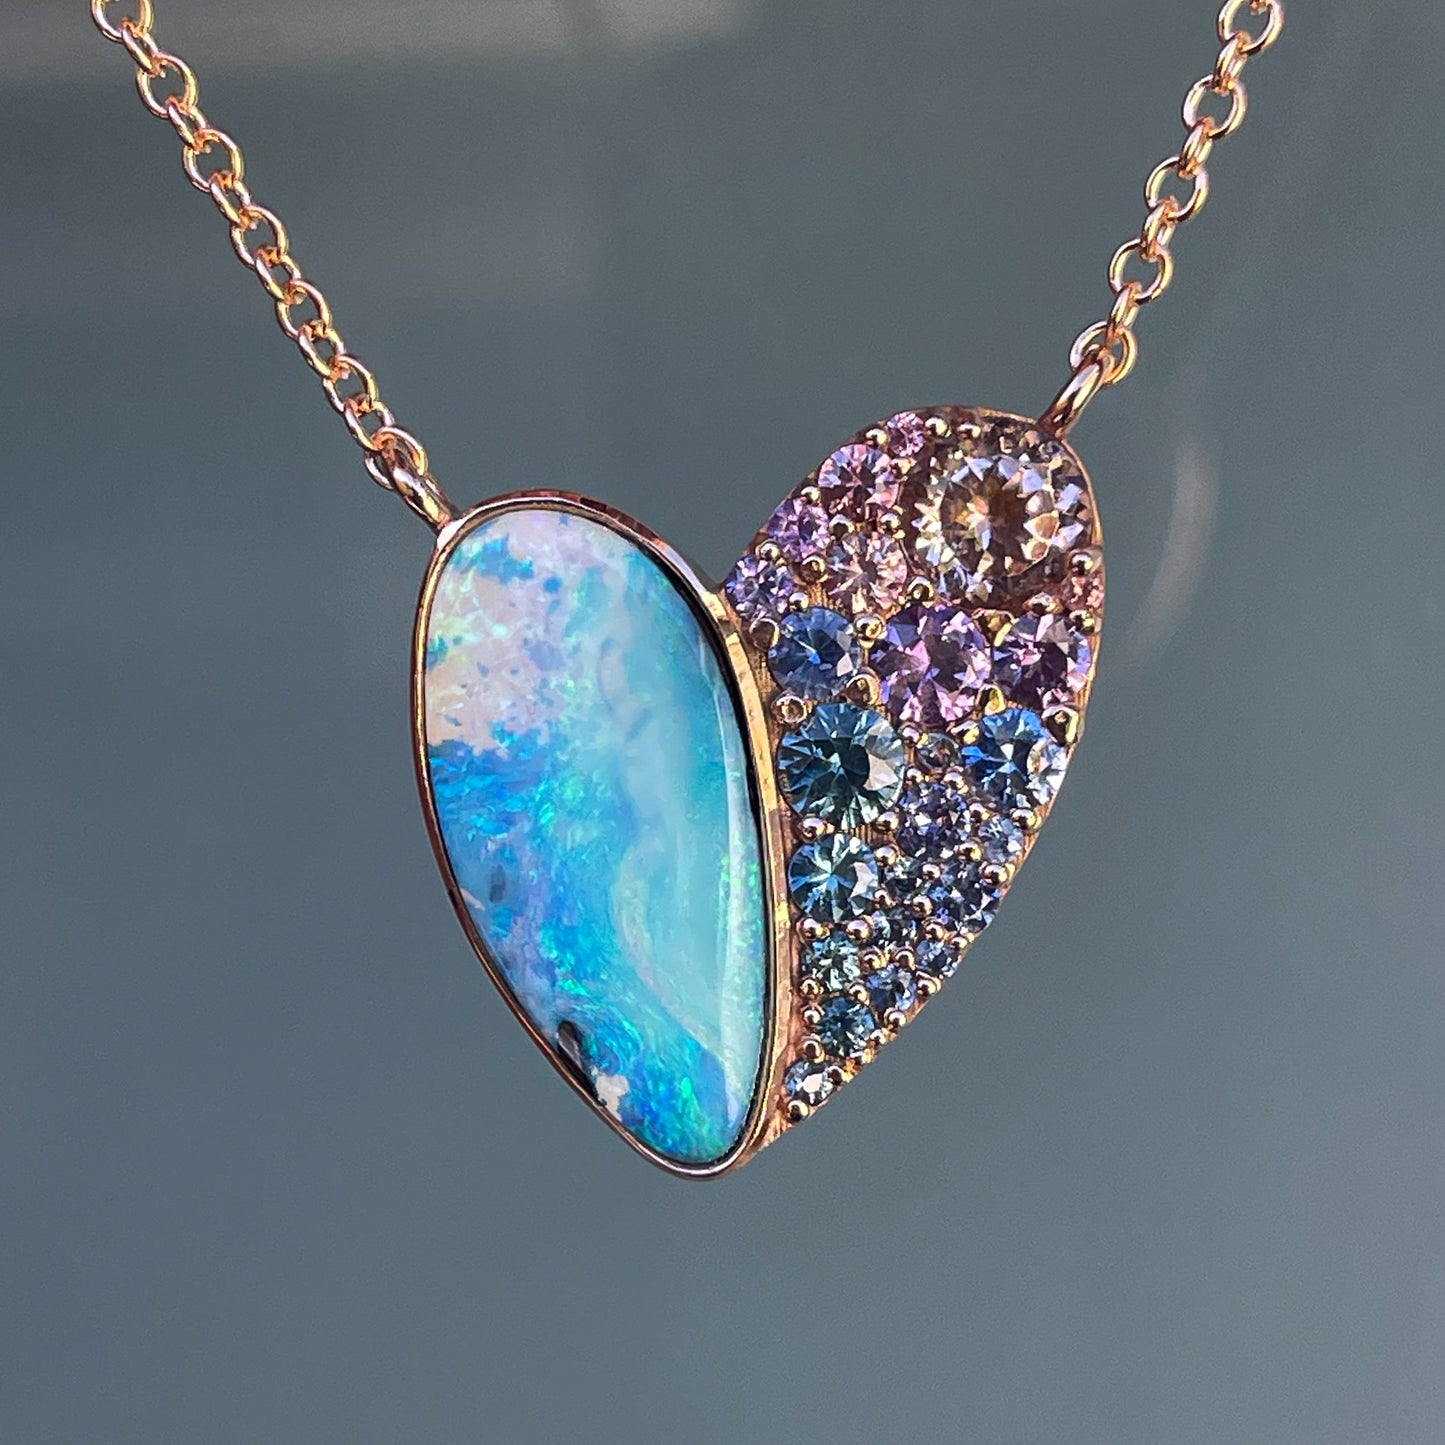 A Heart Opal Necklace by NIXIN Jewelry made in 14k rose gold with an opal and sapphire pendant.